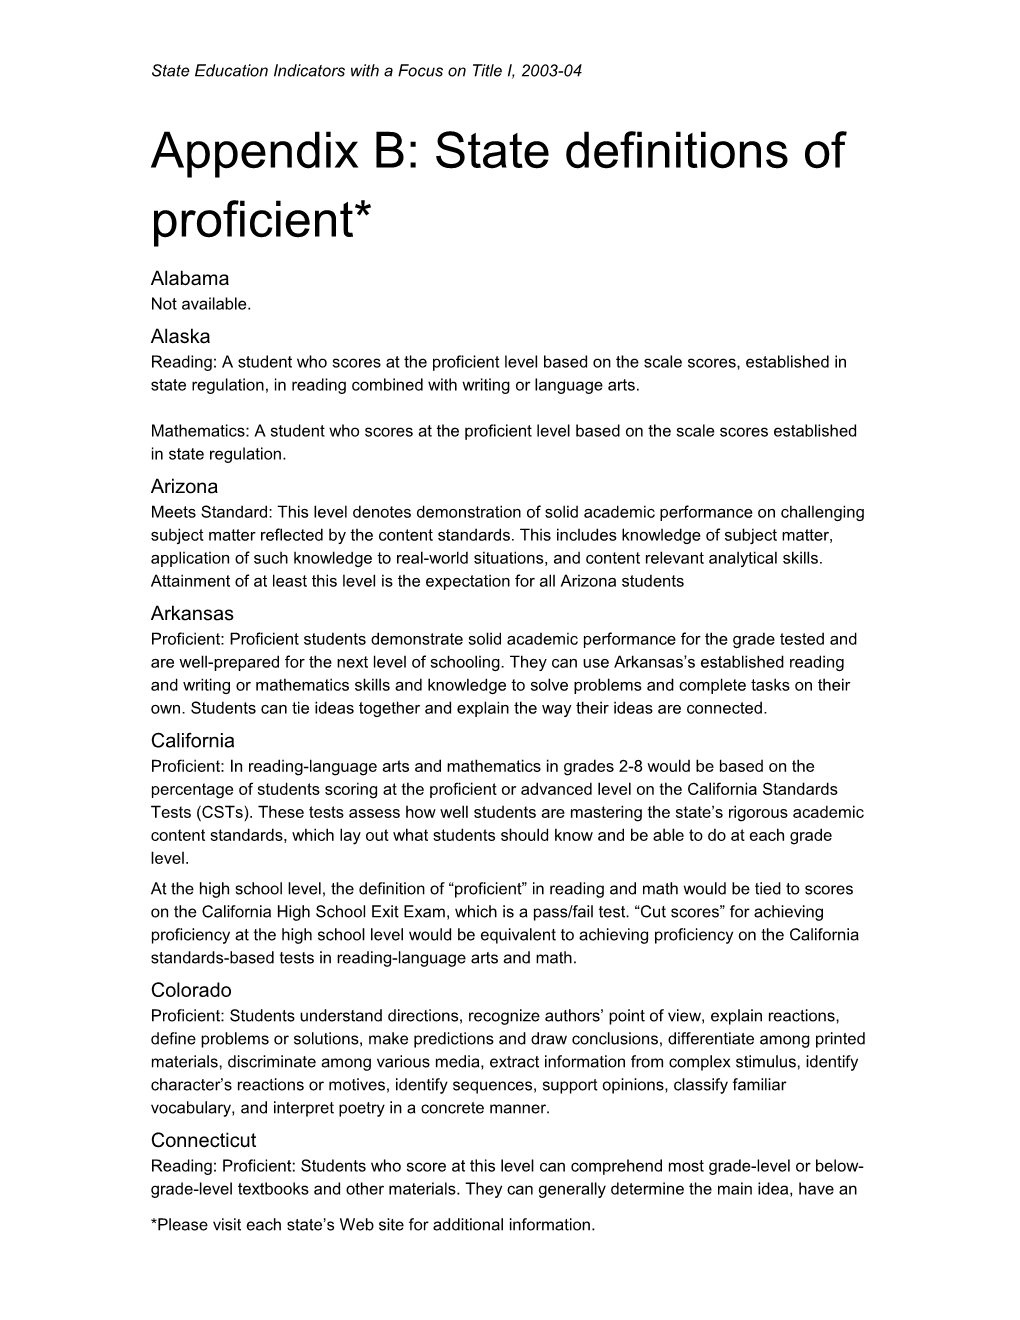 Appendix B: State Definitions of Proficient* State Education Indicators with a Focus On